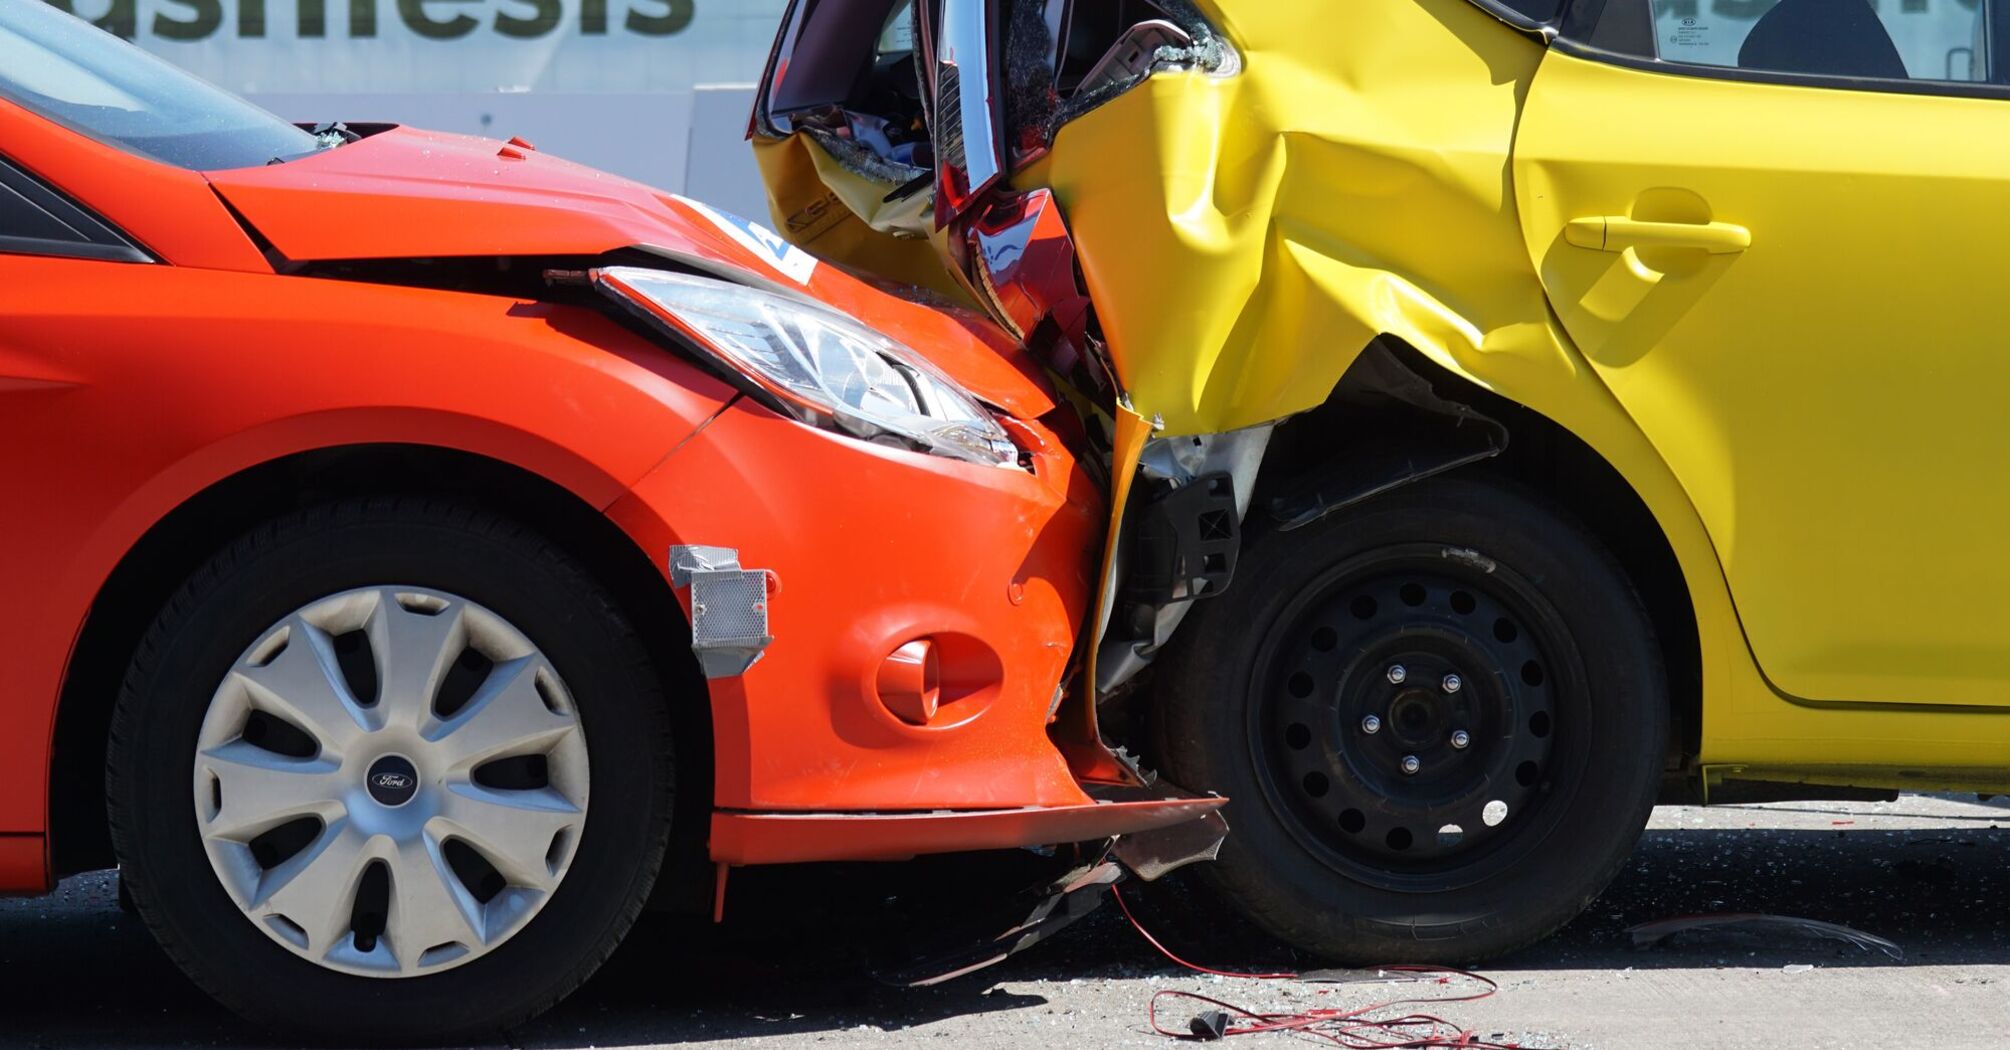 Two cars, one red and one yellow, involved in a collision, depicting a typical road accident that could occur during a road trip